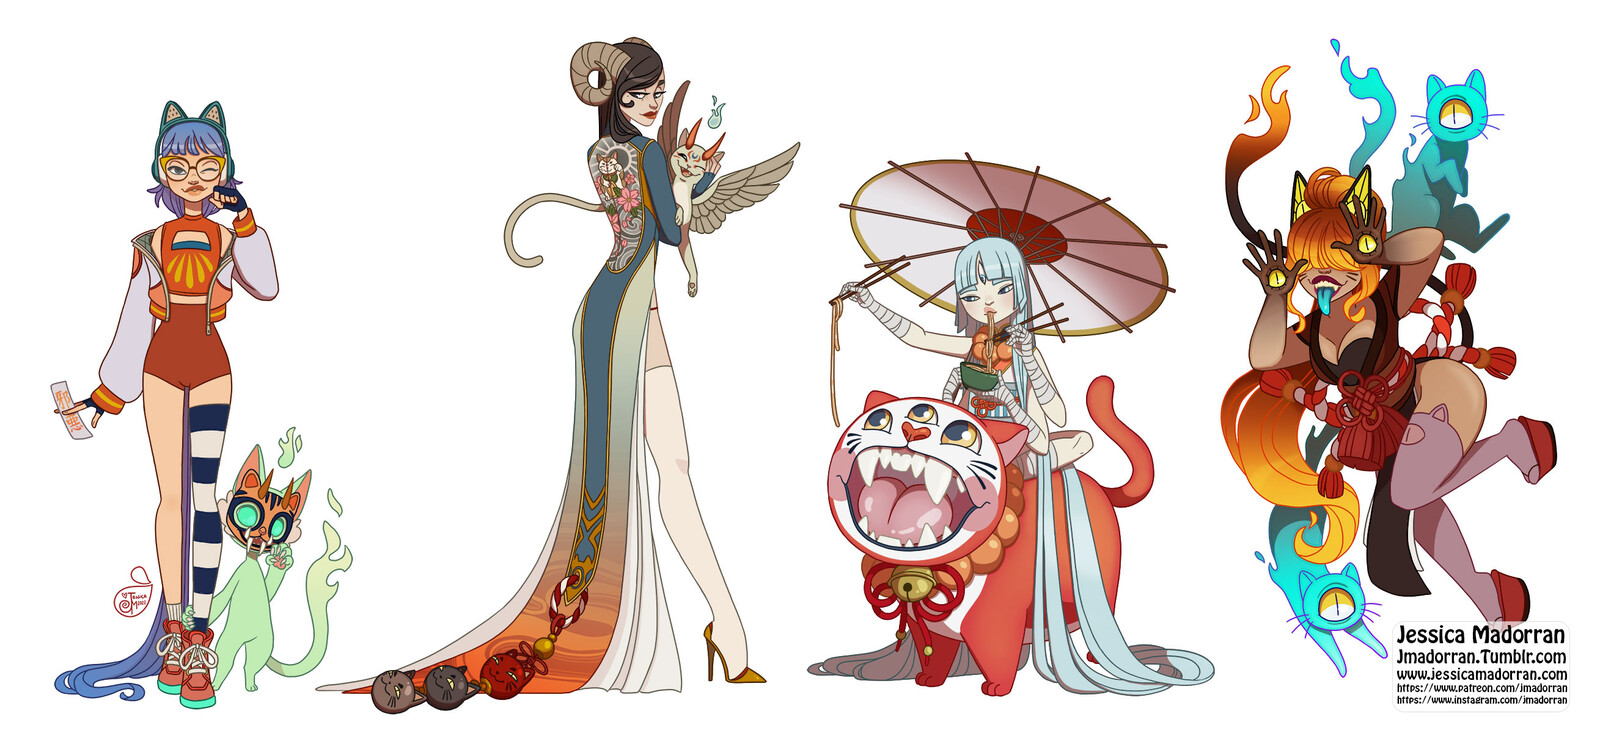 Character Line Up - Japan Inspired 2022